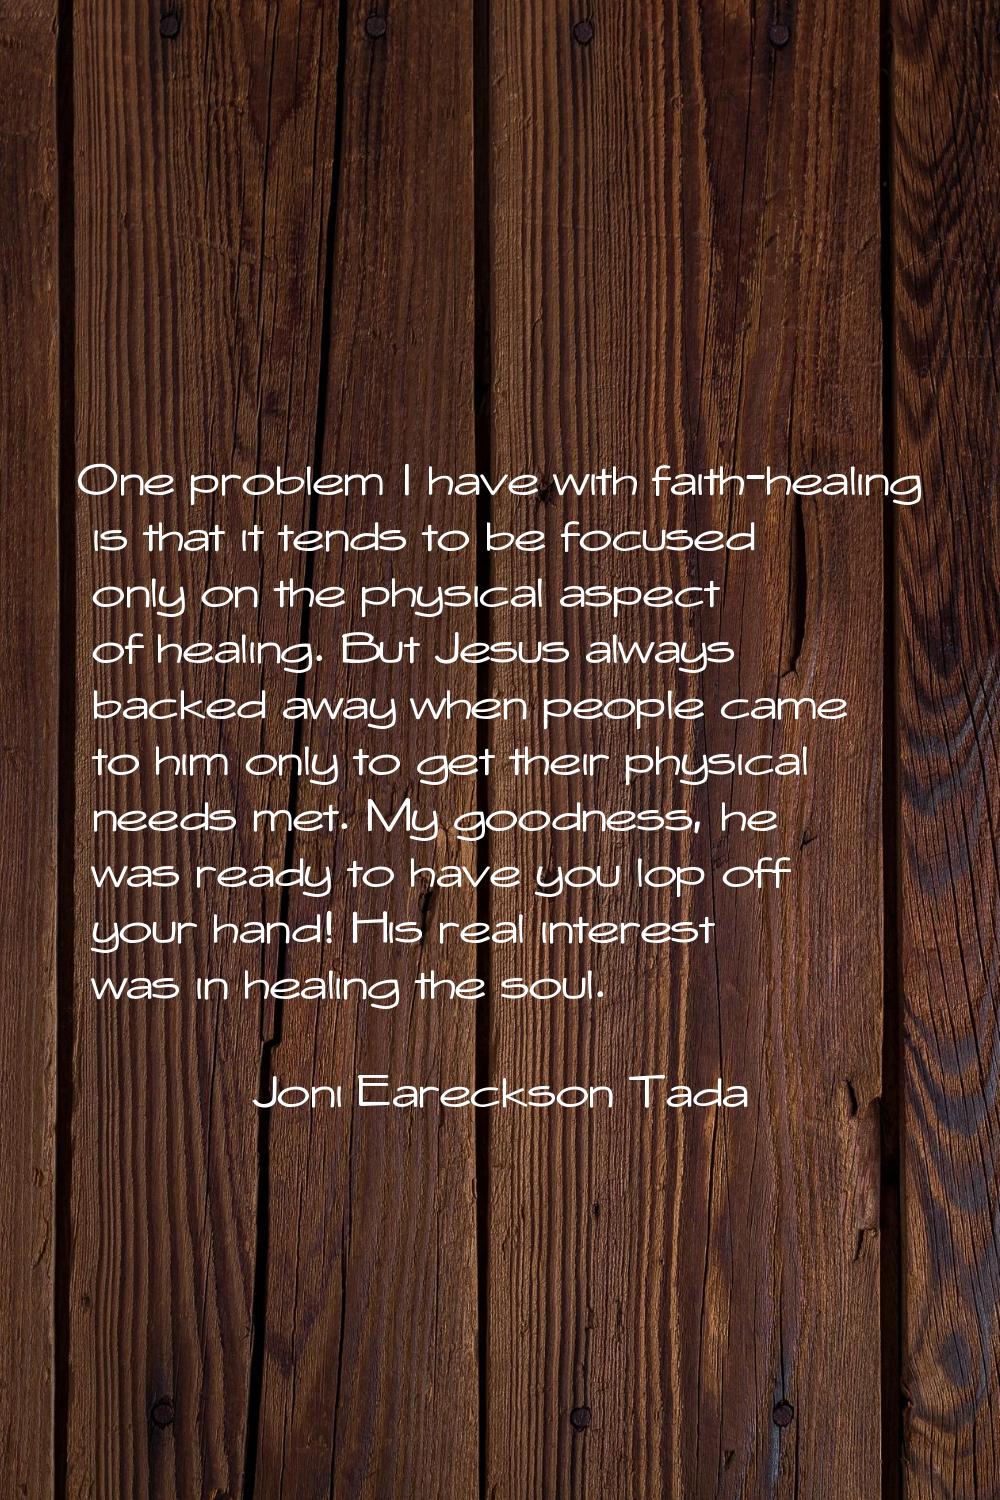 One problem I have with faith-healing is that it tends to be focused only on the physical aspect of